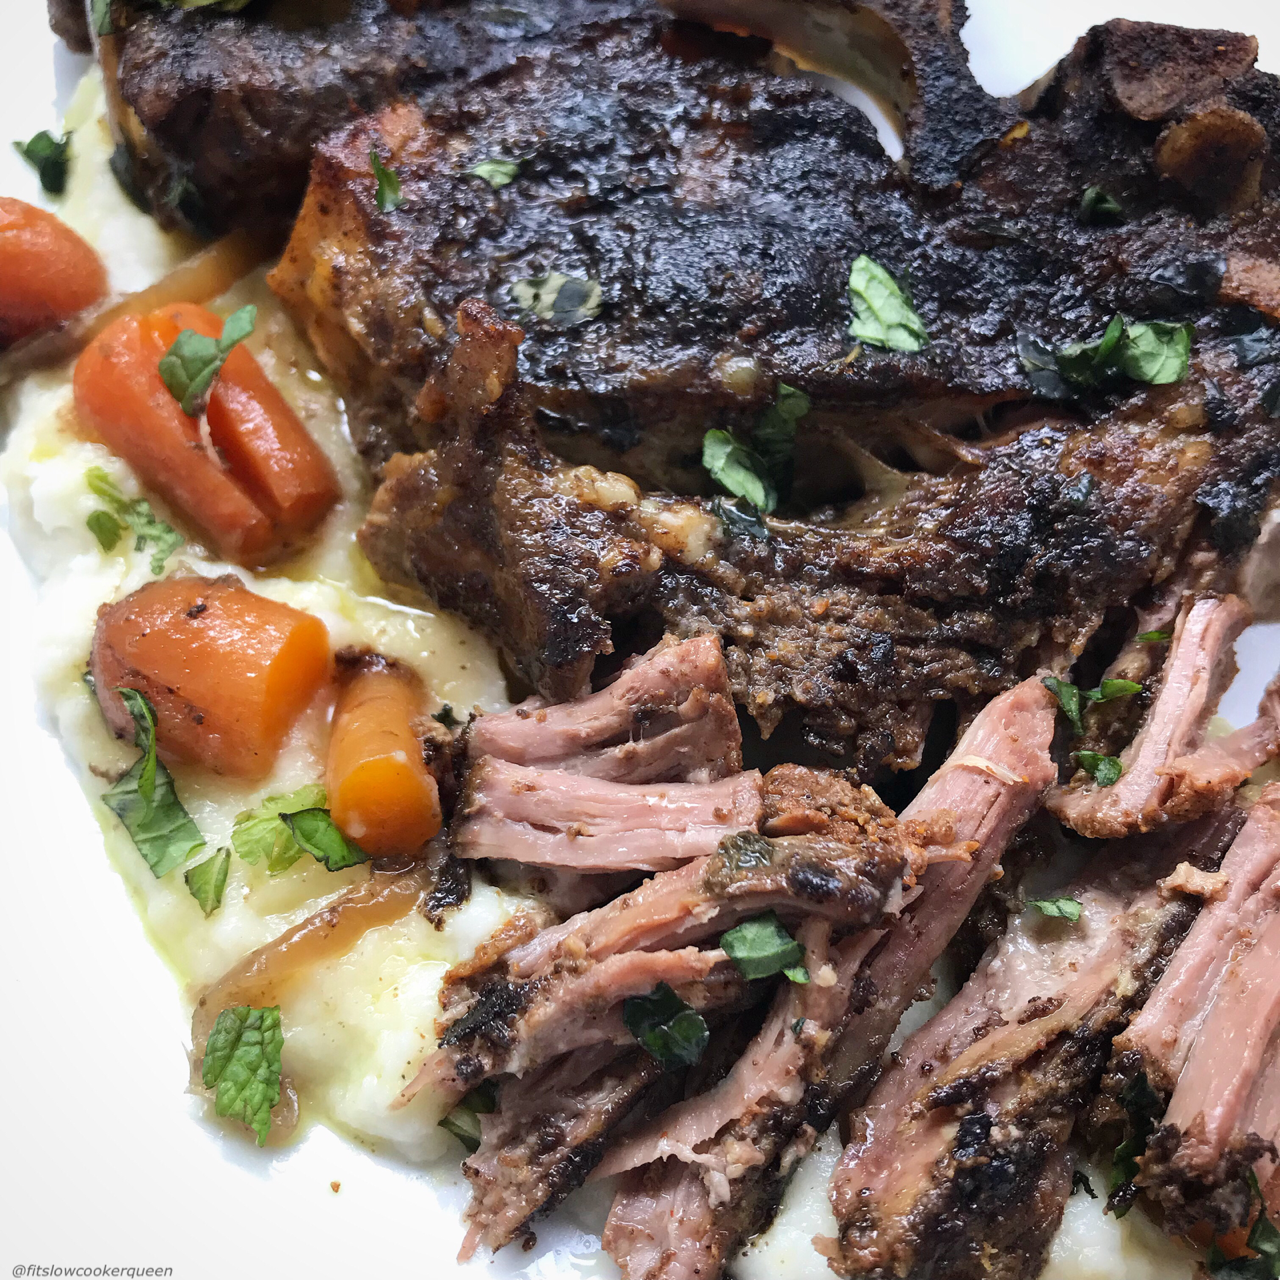 Lamb, spices, and a few vegetables are all you need for this simple and healthy slow cooker recipe. Together these ingredients will bring the flavors of Morocco to your kitchen.